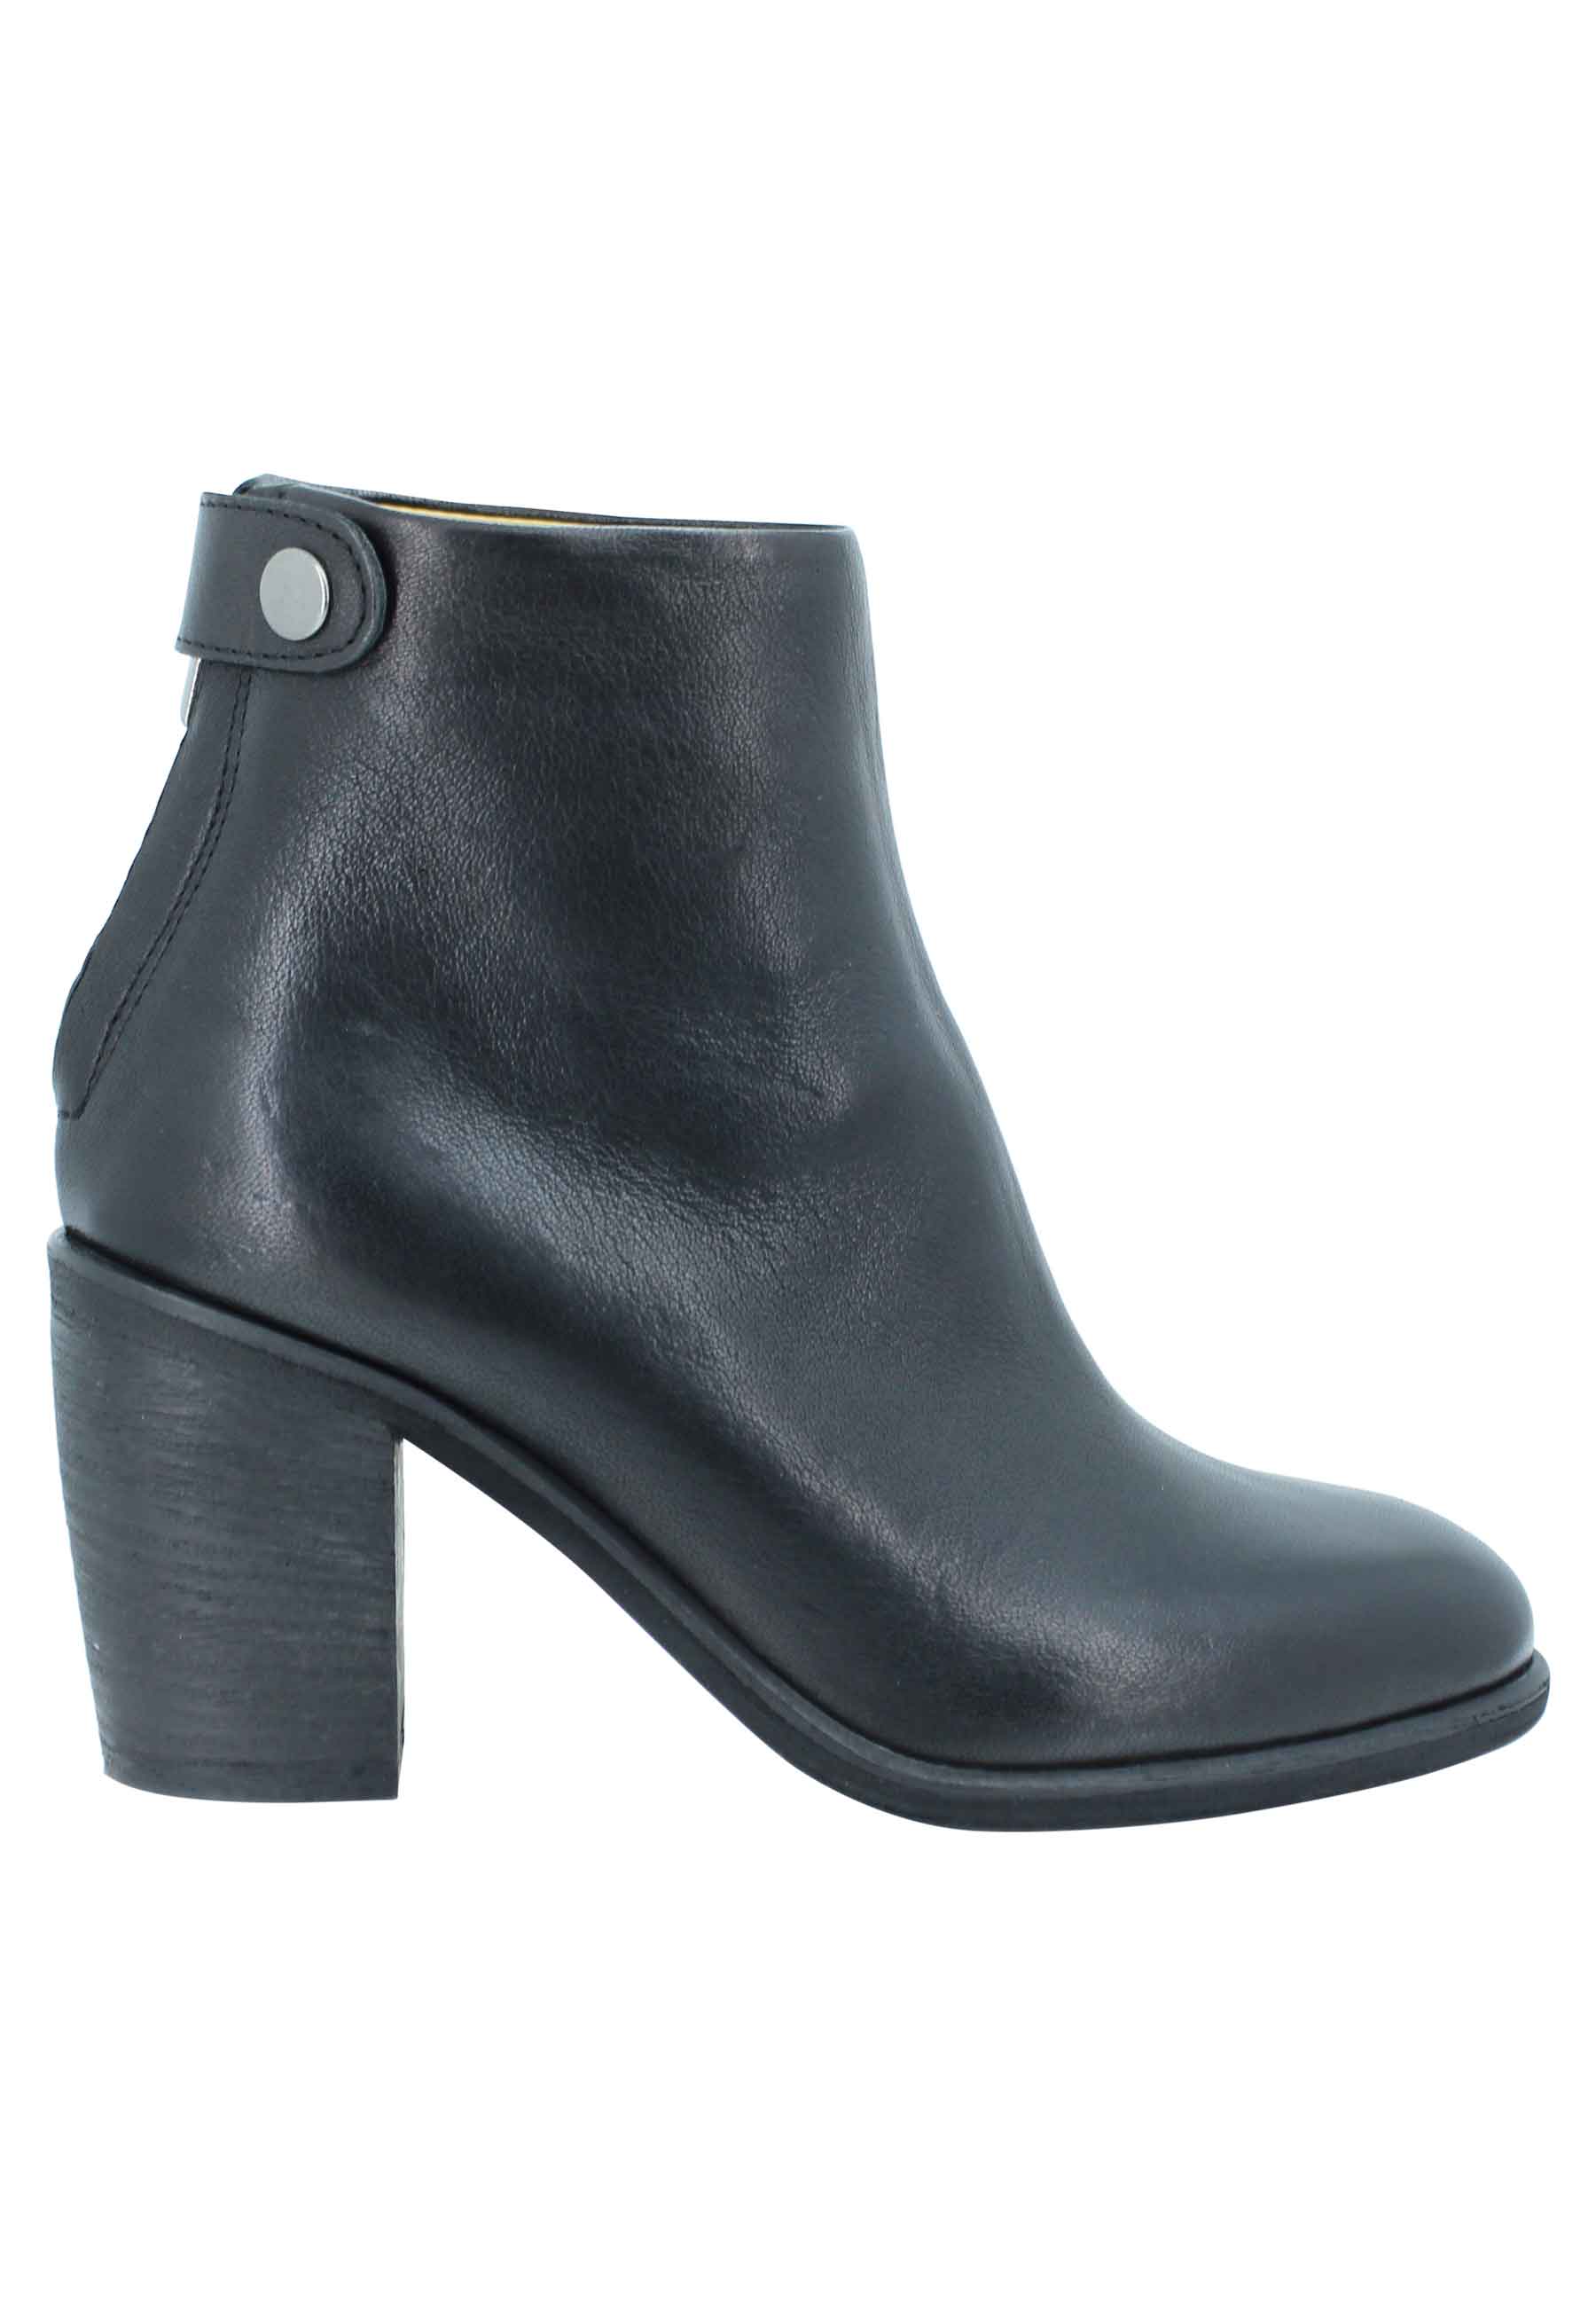 Women's black leather high heel ankle boots with back zip